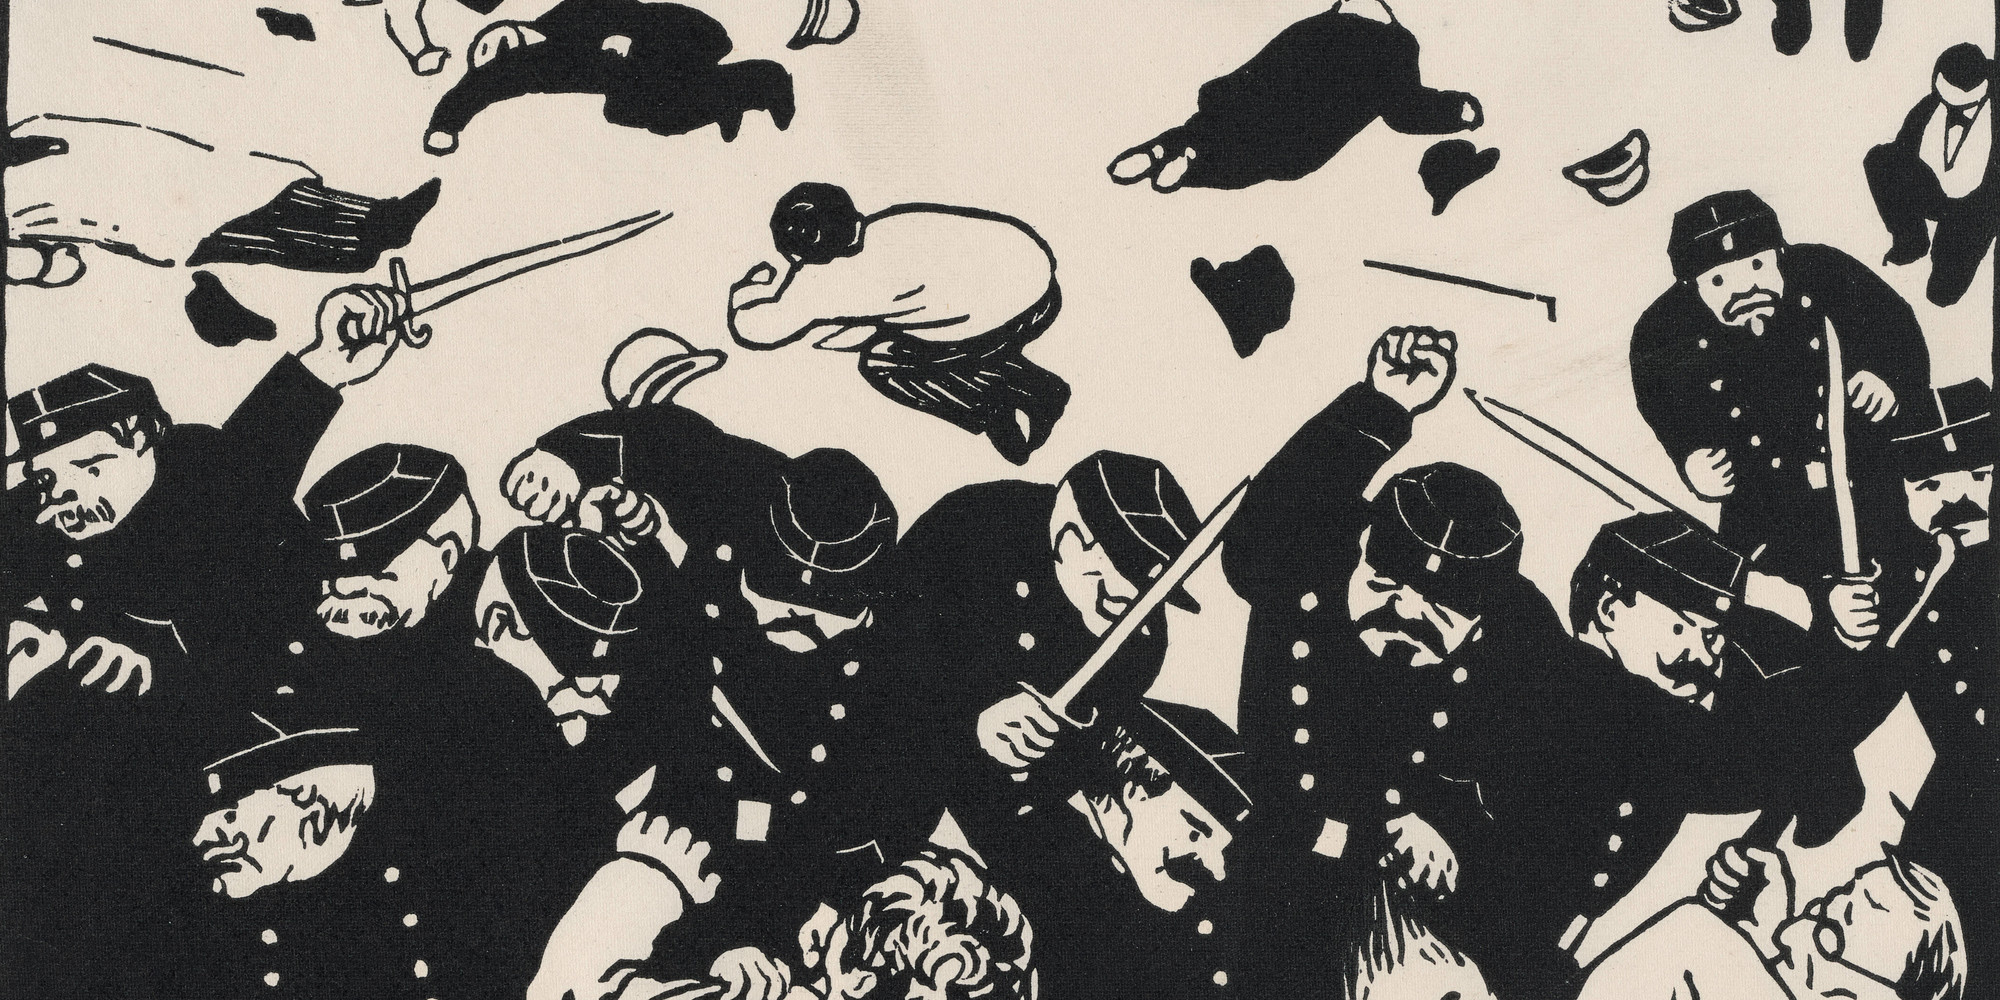 Félix Vallotton. The Charge (La charge). 1893. Woodcut, composition: 7 7/8 × 10 1/4&#34; (20 x 26 cm); sheet: 10 3/16 × 12 3/4&#34; (25.9 × 32.4 cm). The Museum of Modern Art, New York. Larry Aldrich Fund